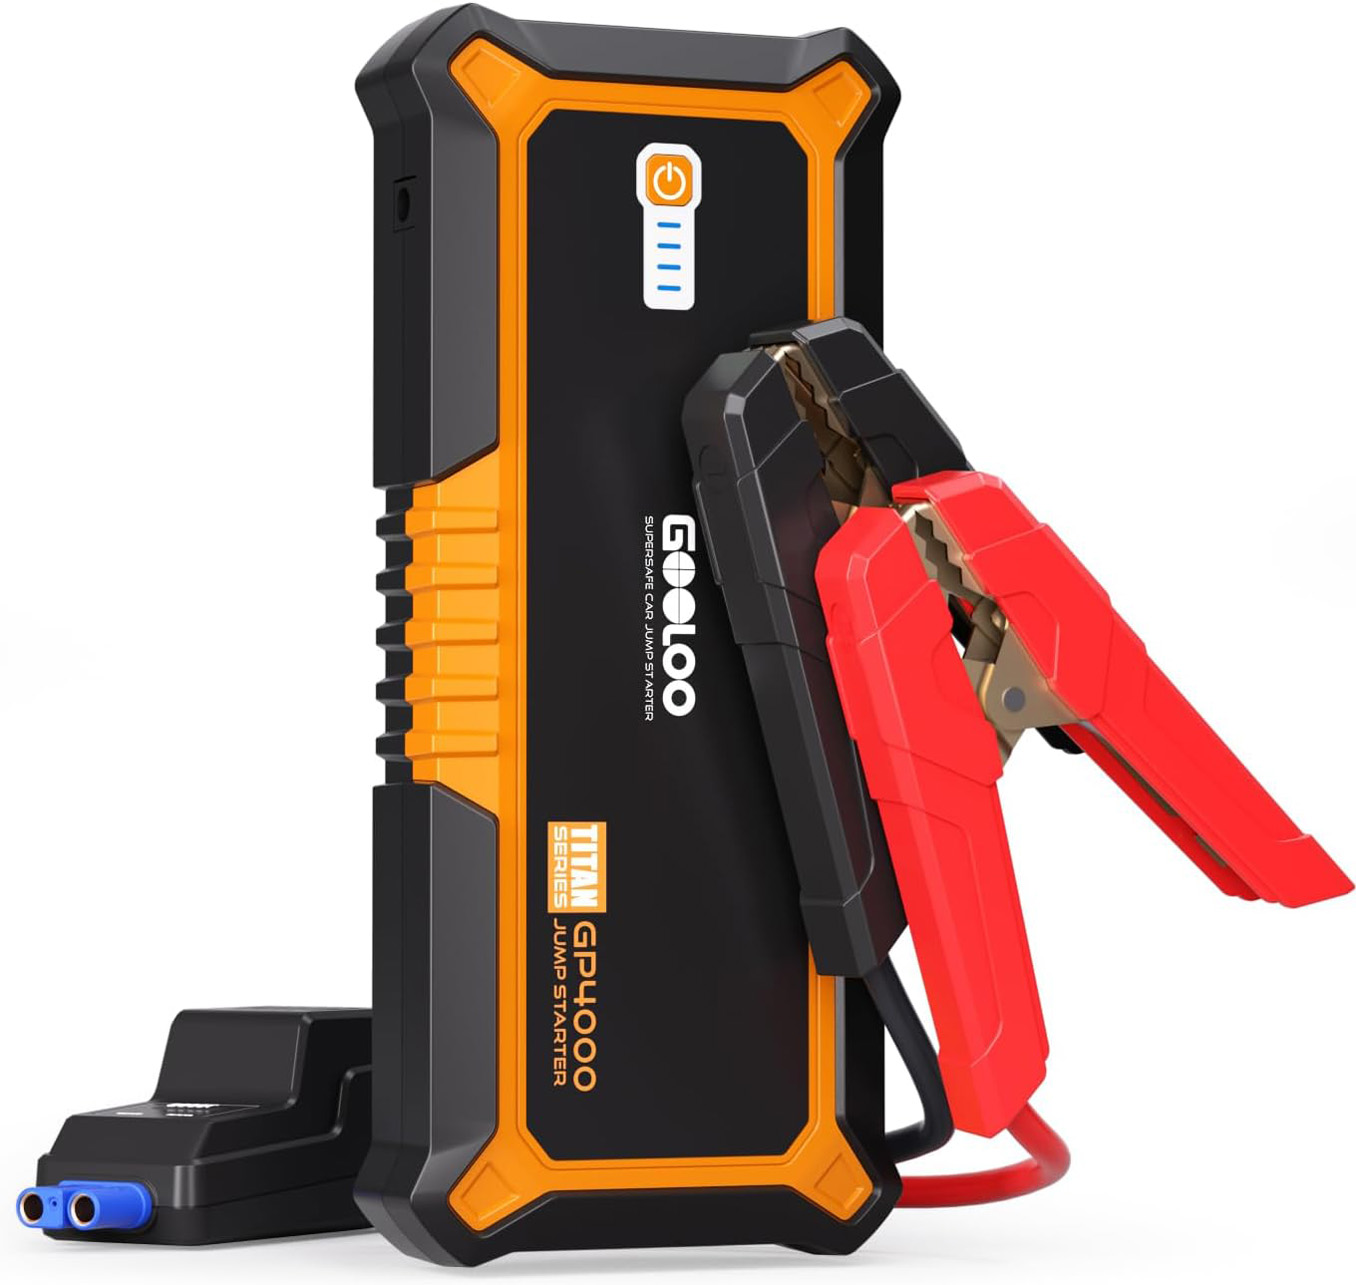 GOOLOO 4000A Peak Car Jump Starter 12V Auto Battery Booster SuperSafe Lithium Jump Box for All Gas